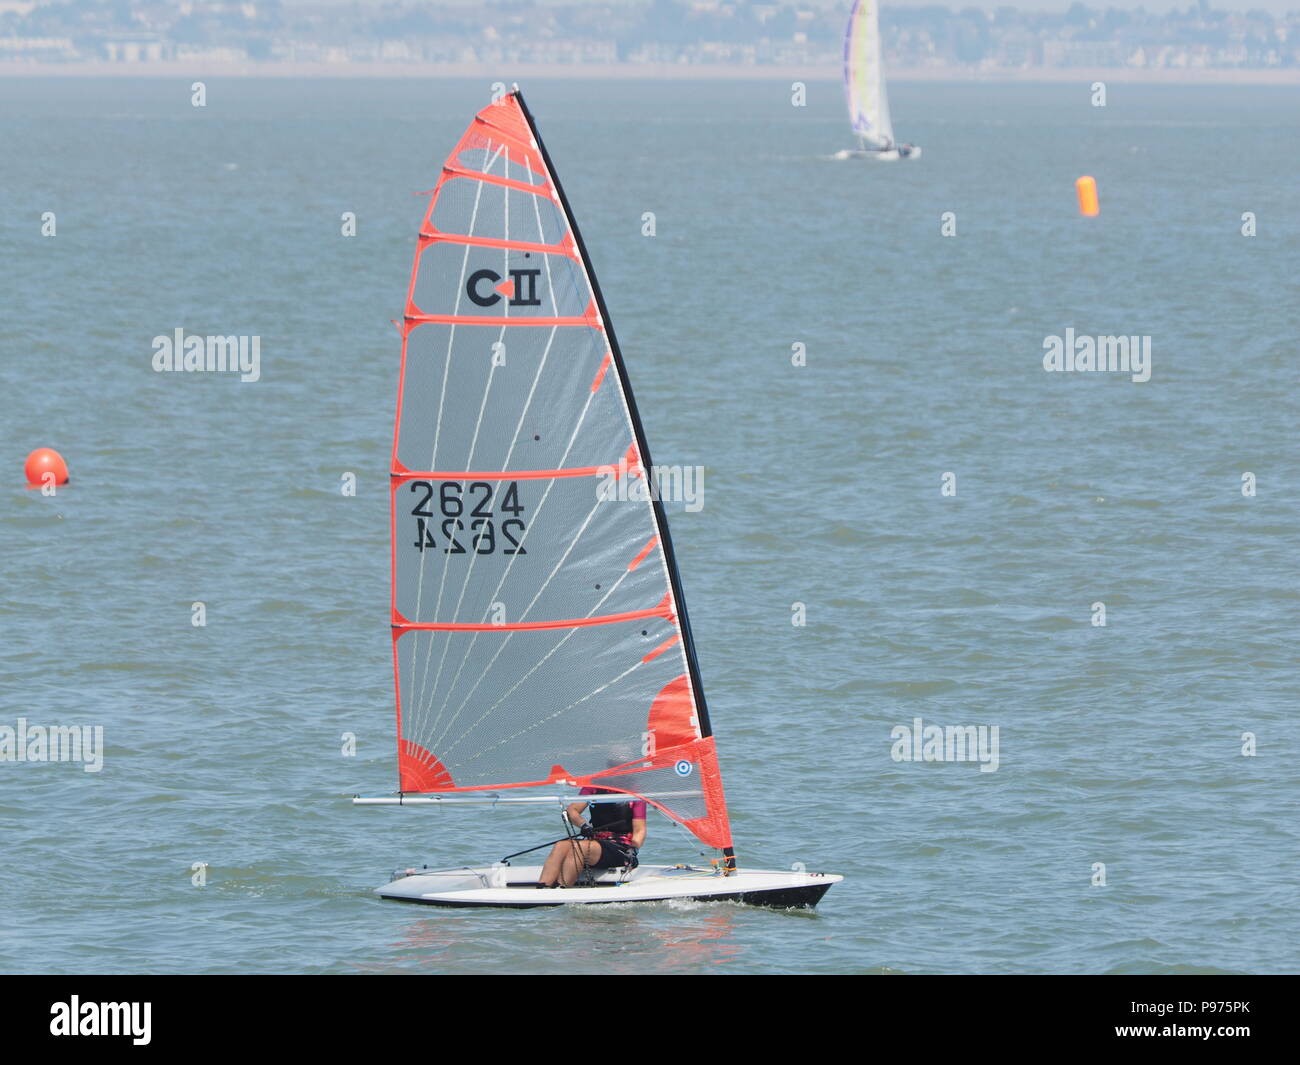 Sheerness, Kent, UK. 15th July, 2018. UK Weather: a sunny, dry and warm day at midday on St. Swithin's Day as members of the Isle of Sheppey Sailing Club take to the waters of the Thames Estuary off Sheerness in Kent. Credit: James Bell/Alamy Live News Stock Photo